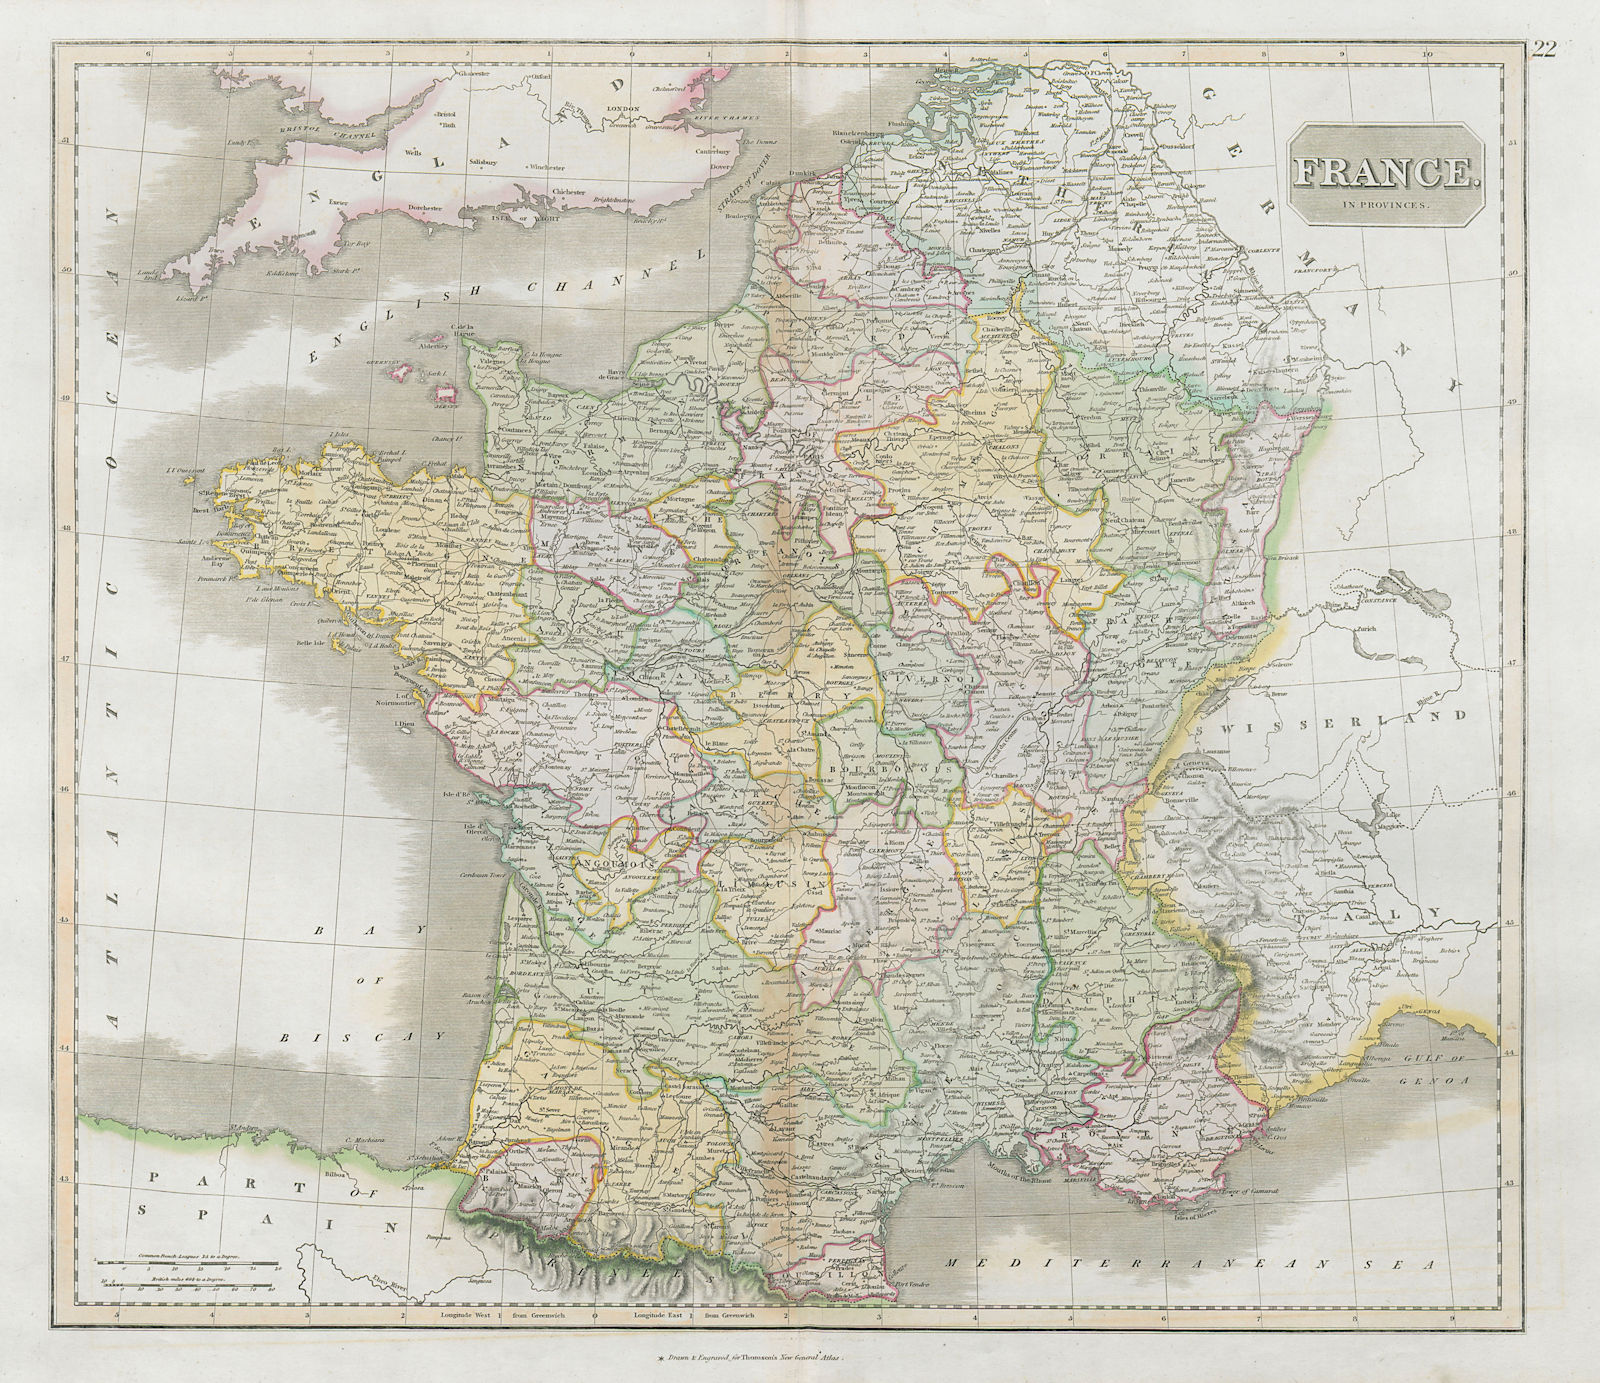 Associate Product "France in provinces", before the Revolution, w/o Savoy & Nice. THOMSON 1830 map